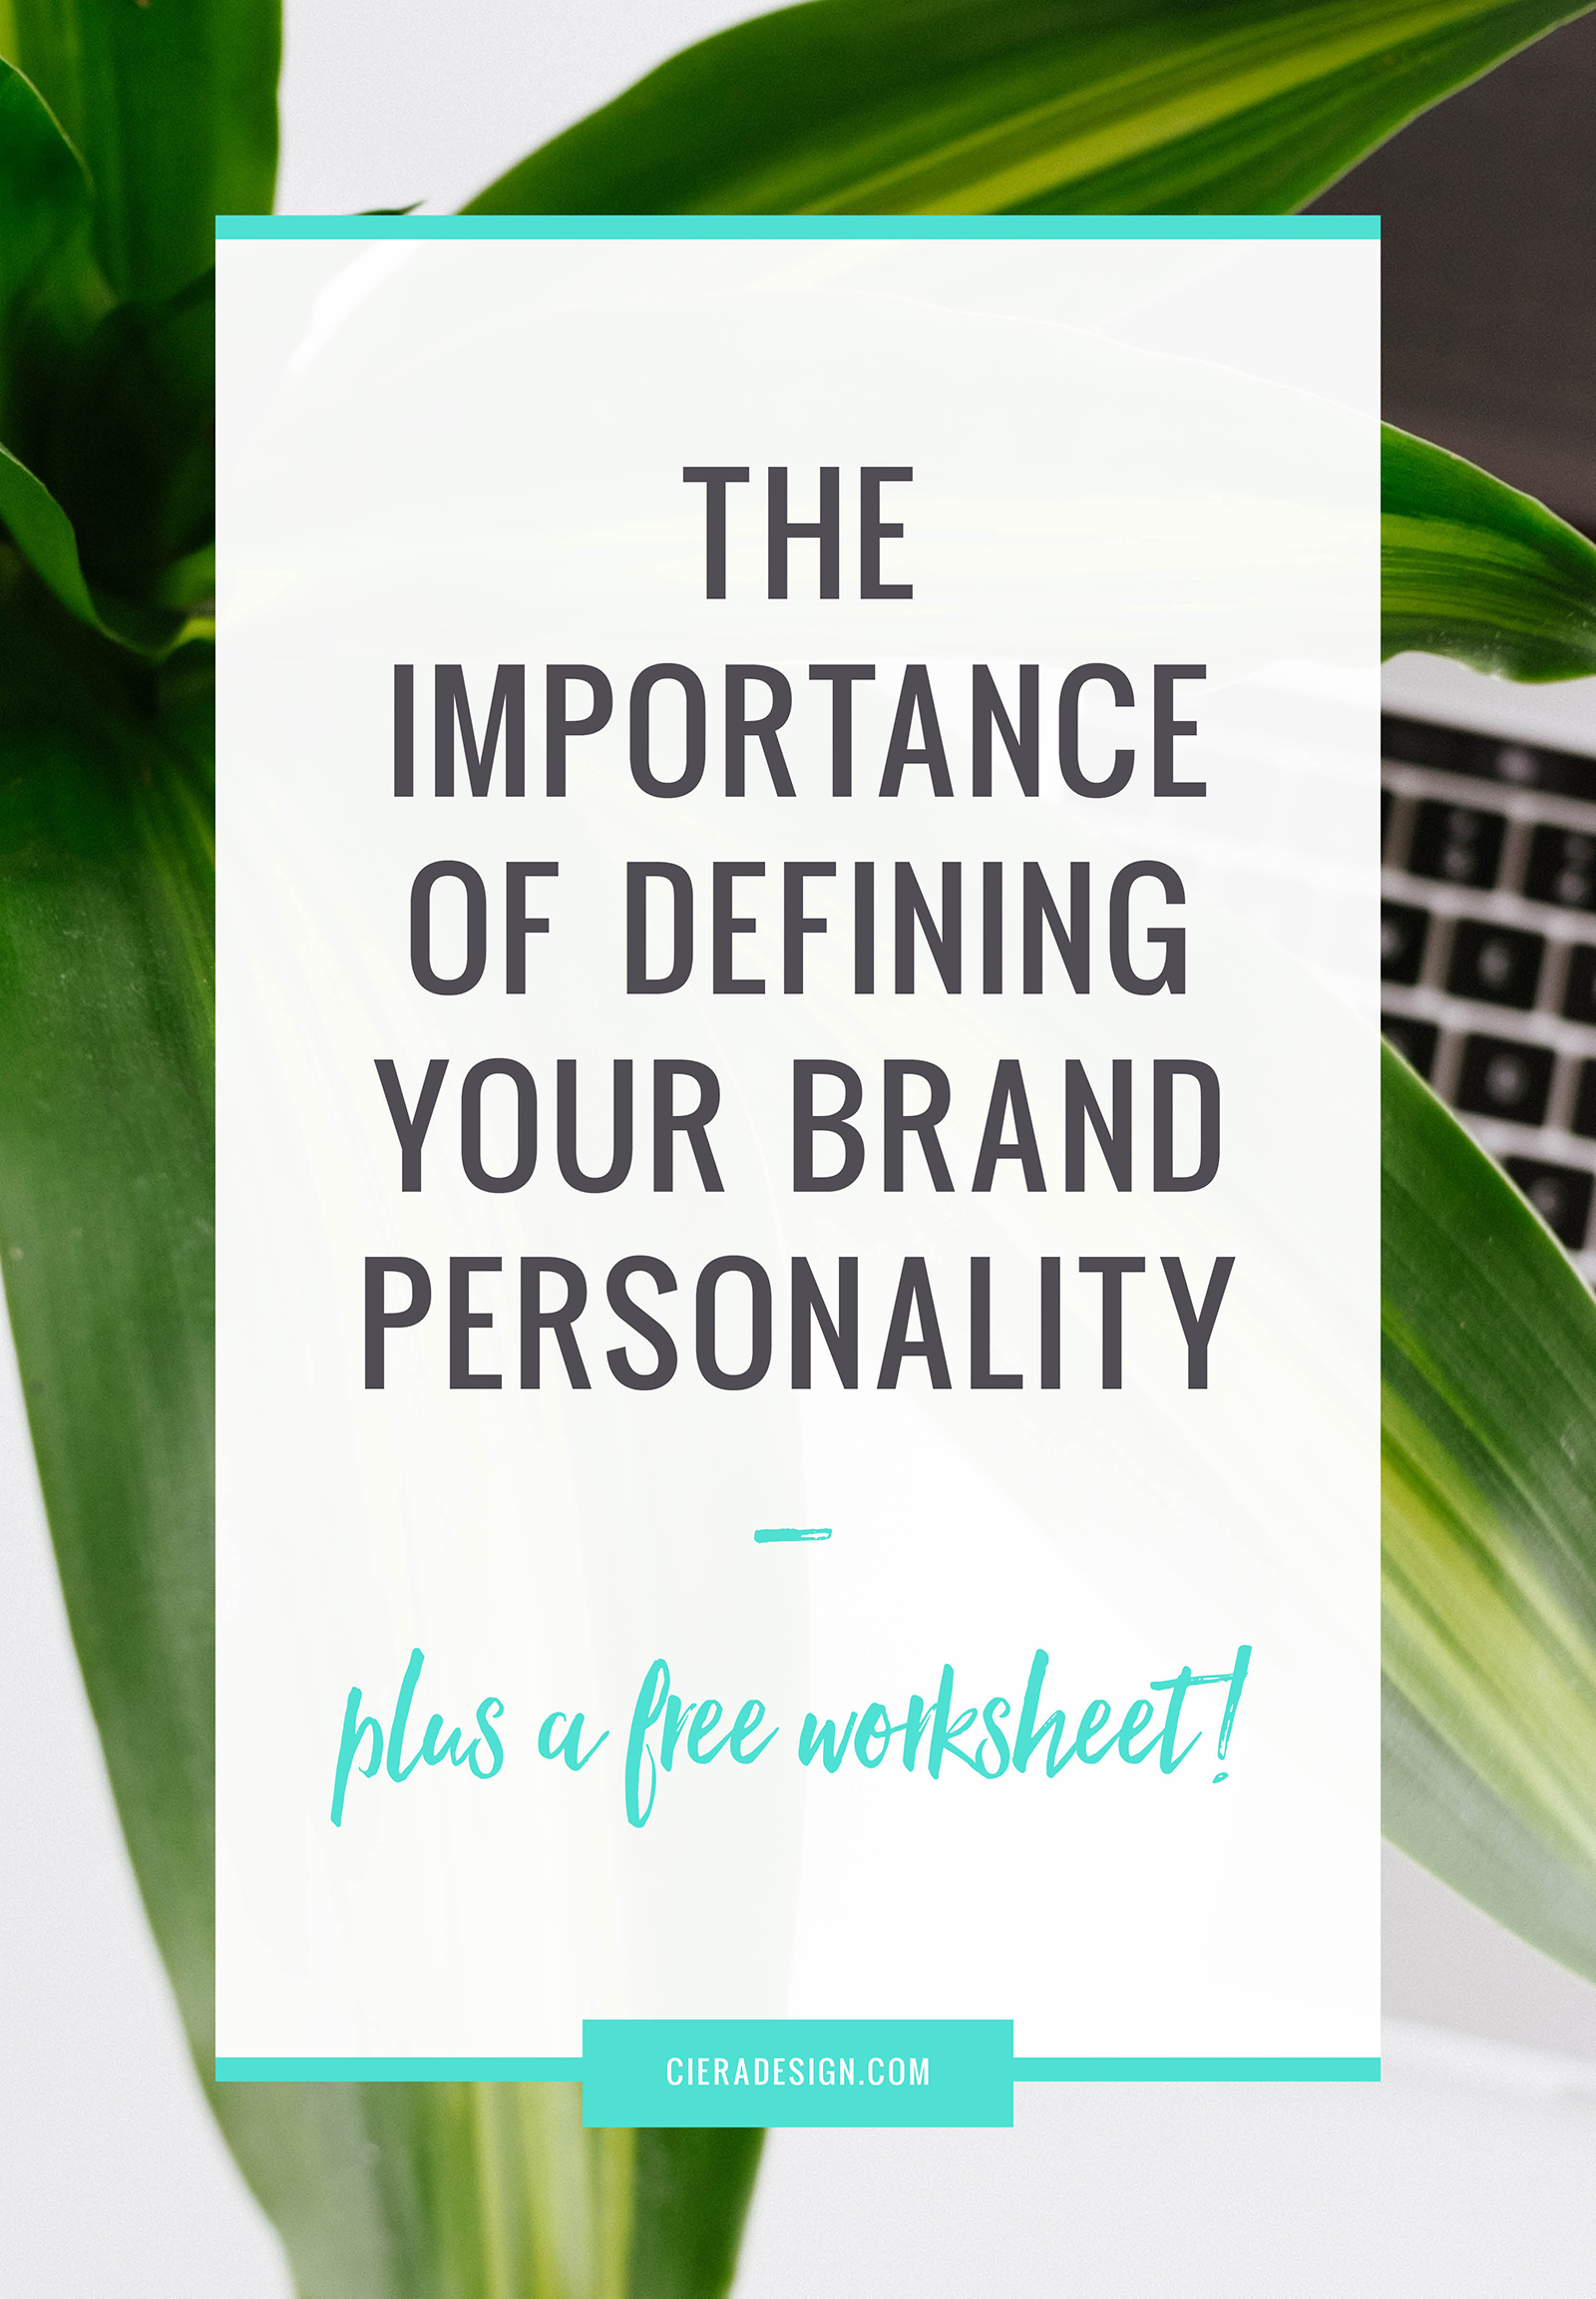 The Importance of Defining Your Brand Personality Plus A FREE Worksheet!